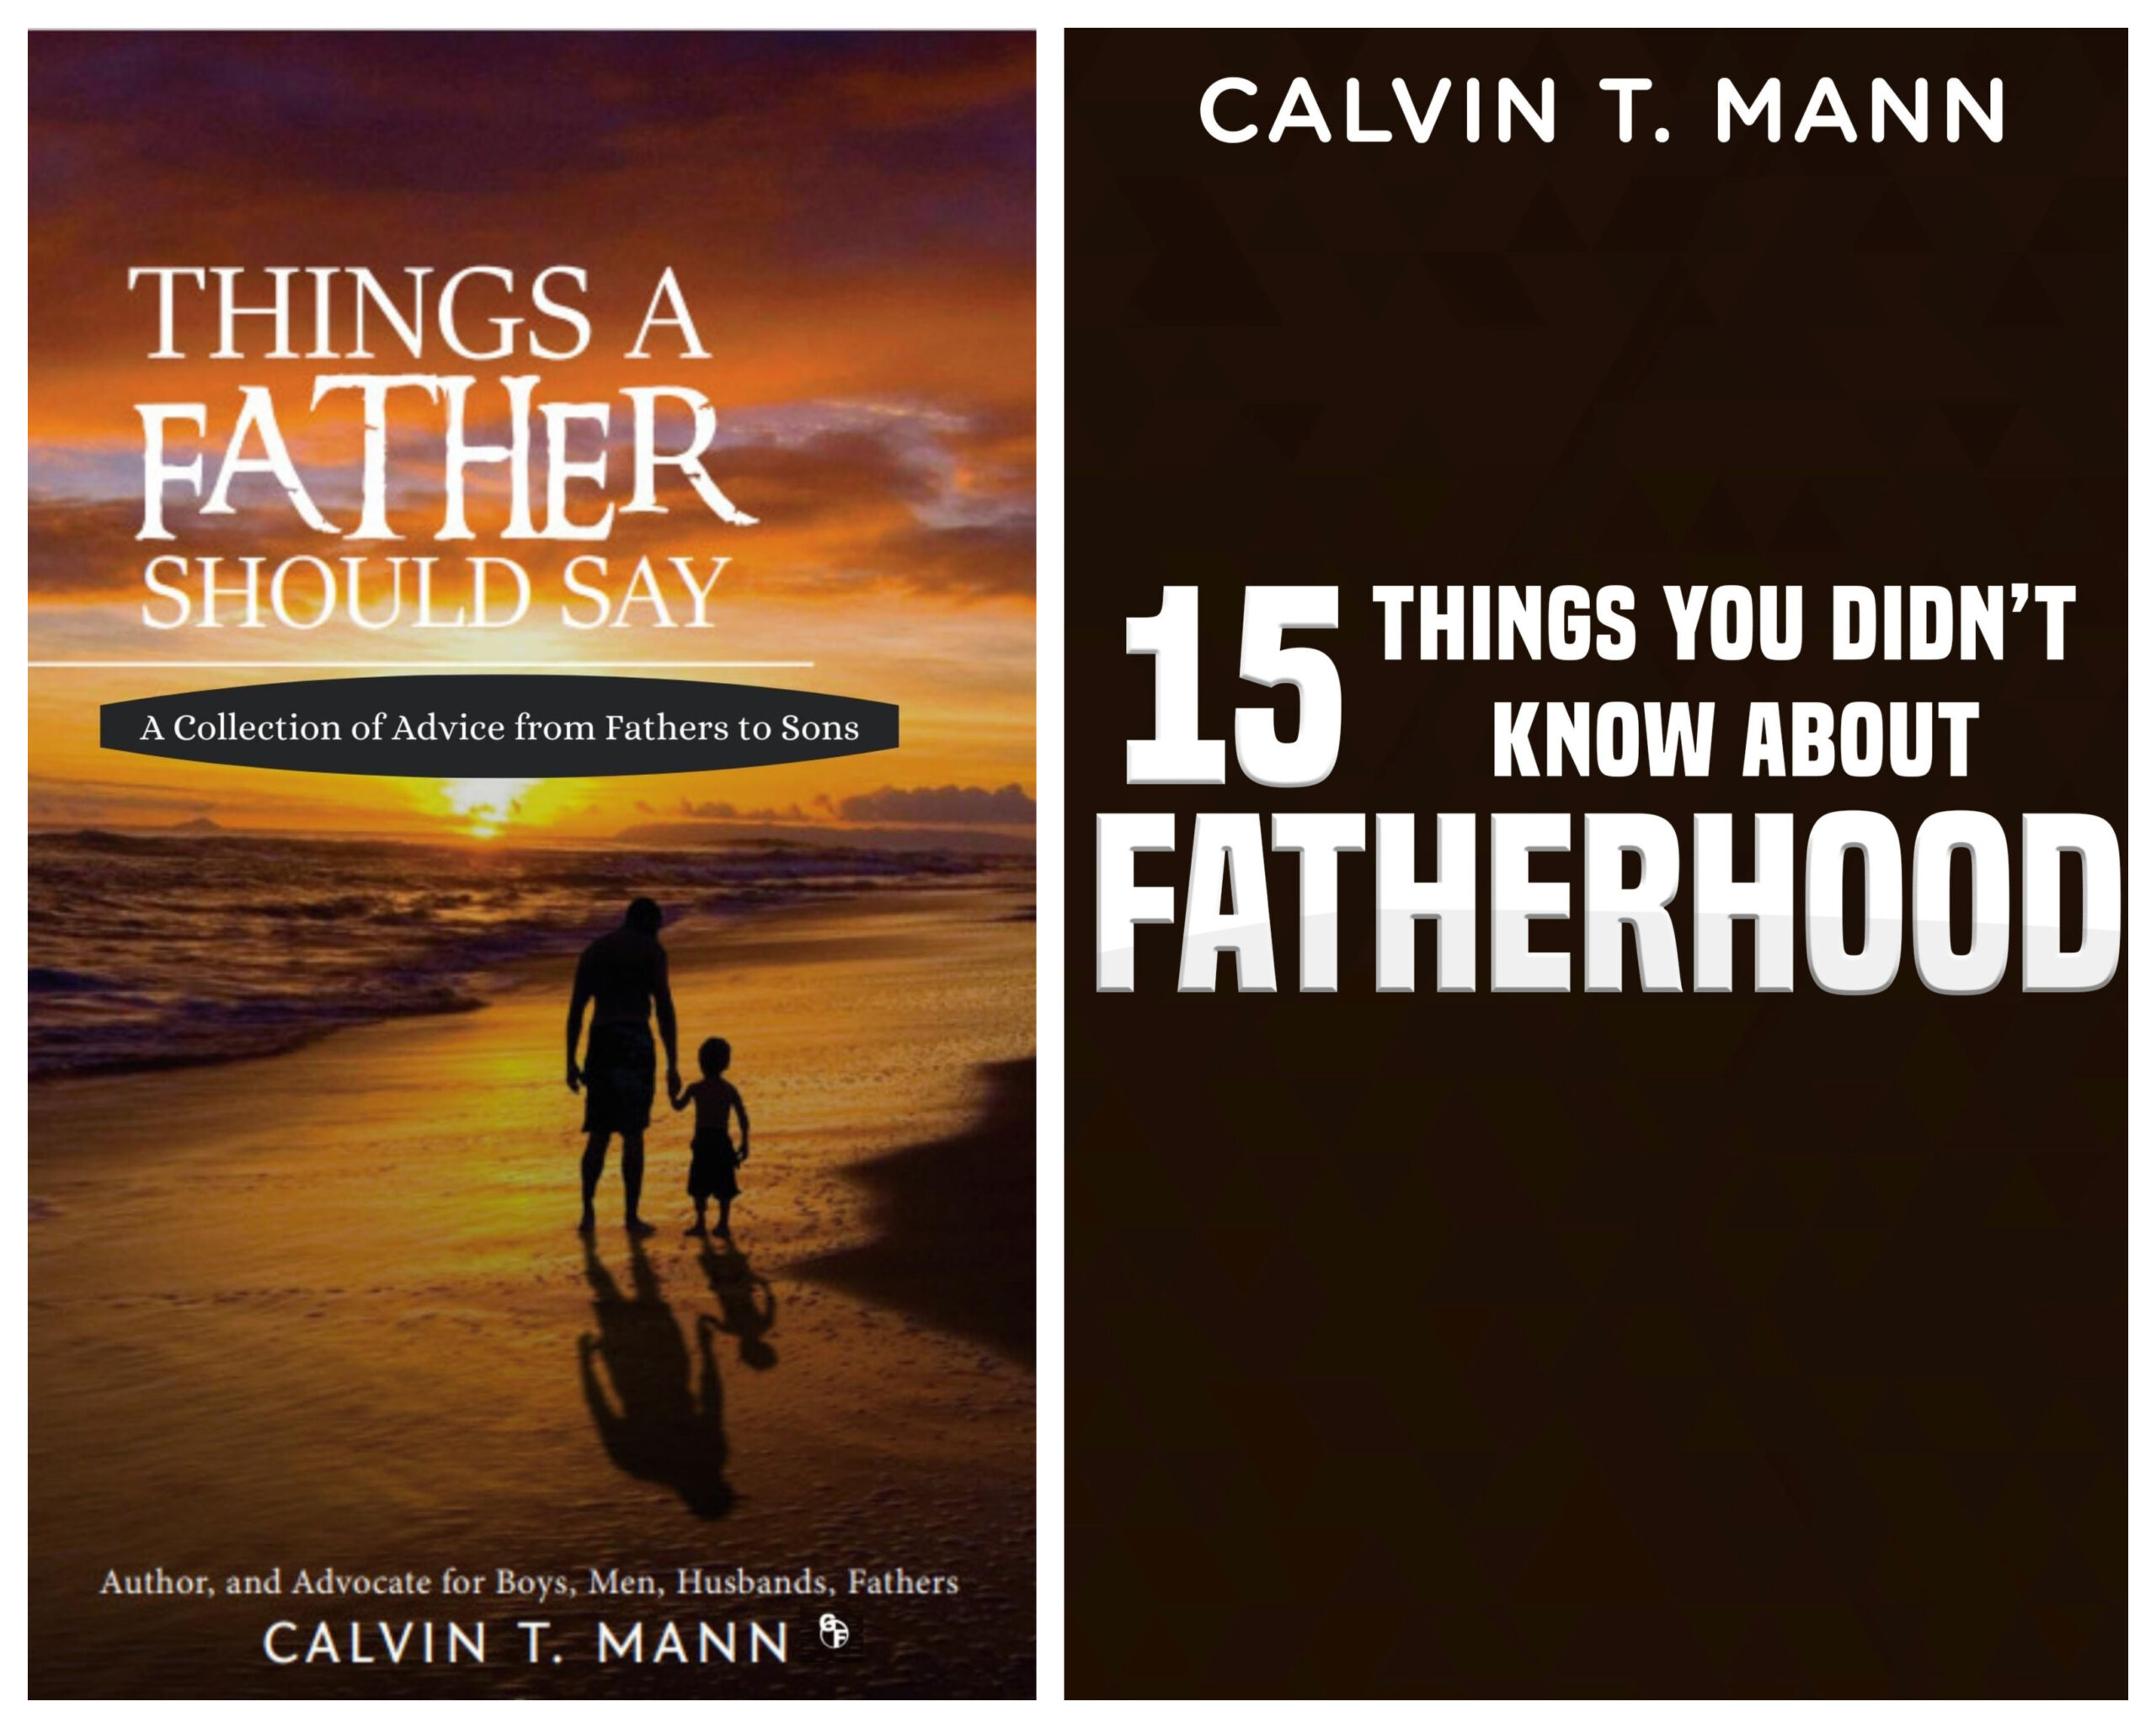 Calvin T. Mann Continues to Sound the Usefulness of Fatherhood with Two New Books 1